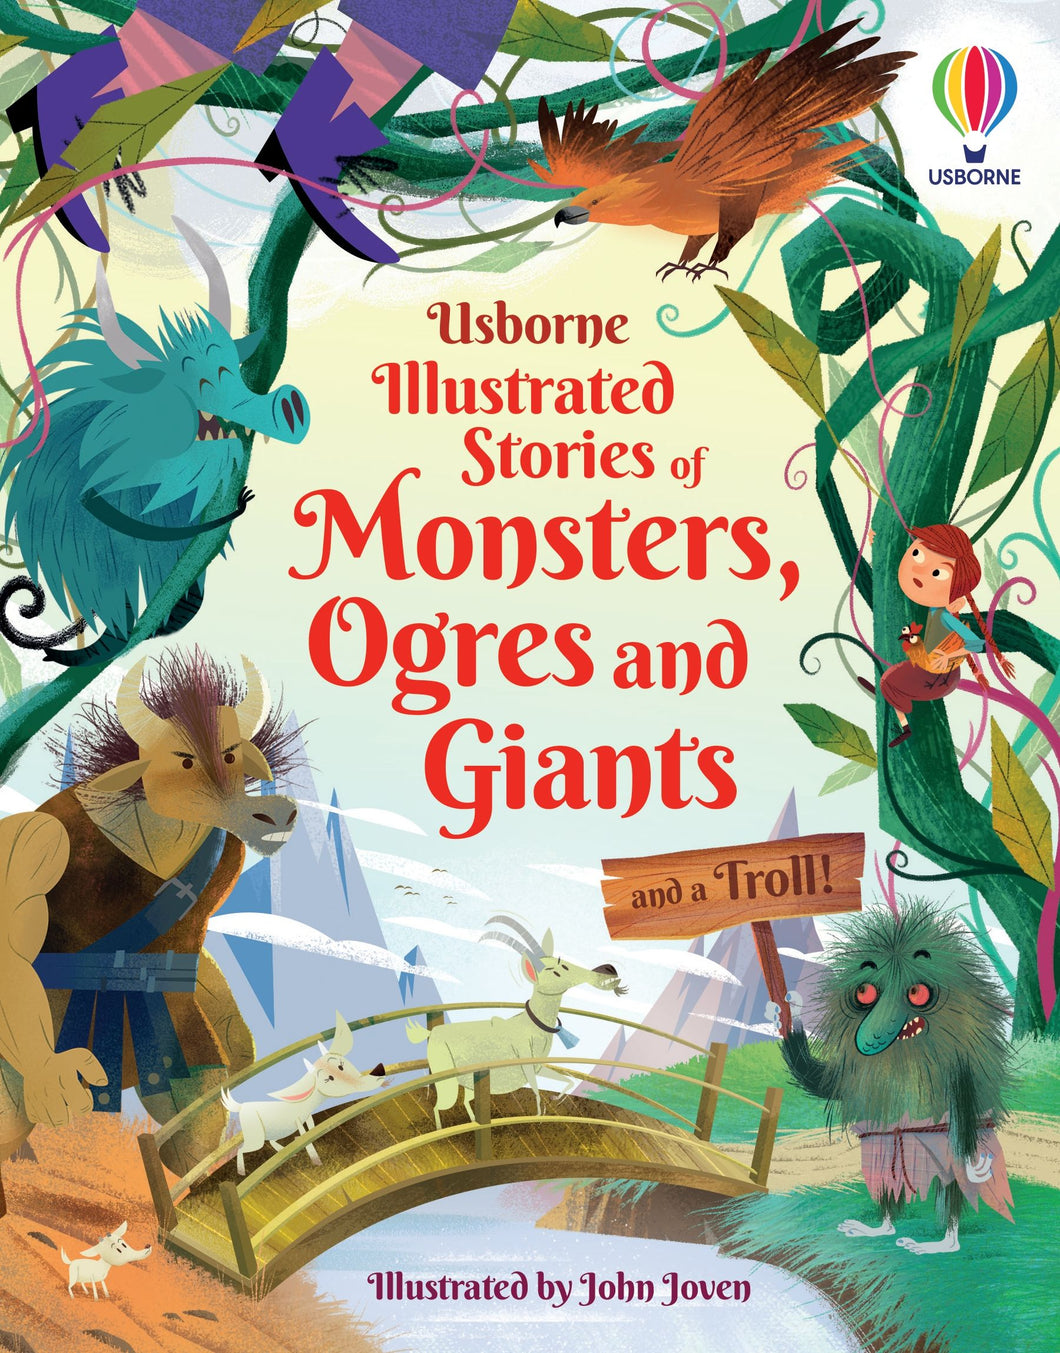 Usborne - Illustrated Stories of Monsters, Ogres and Giants and a Troll!